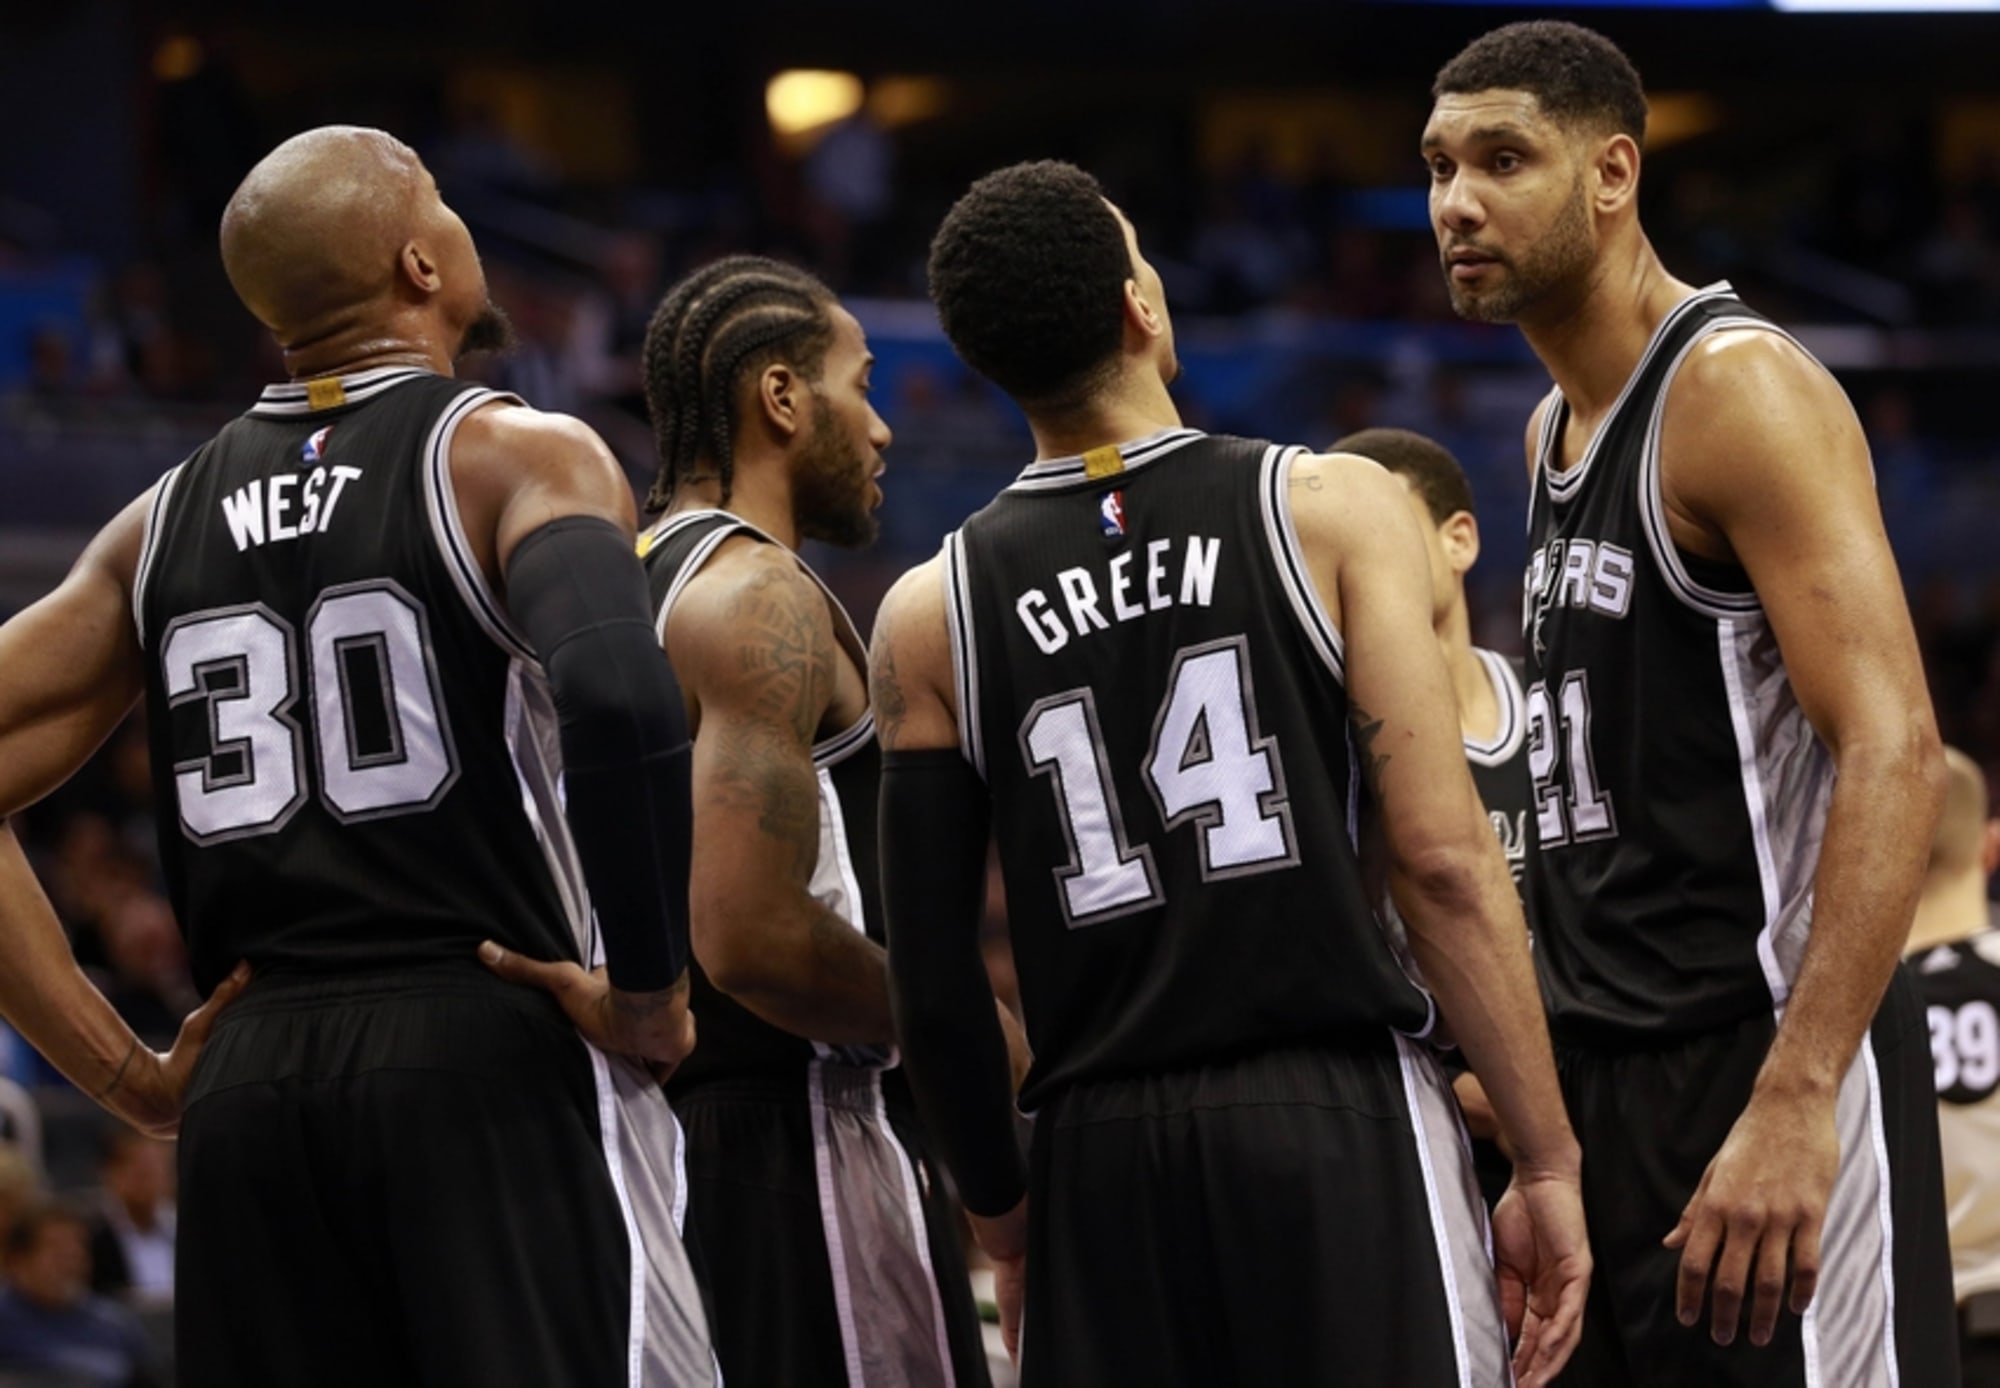 Looking at the Spurs depth chart and what it means